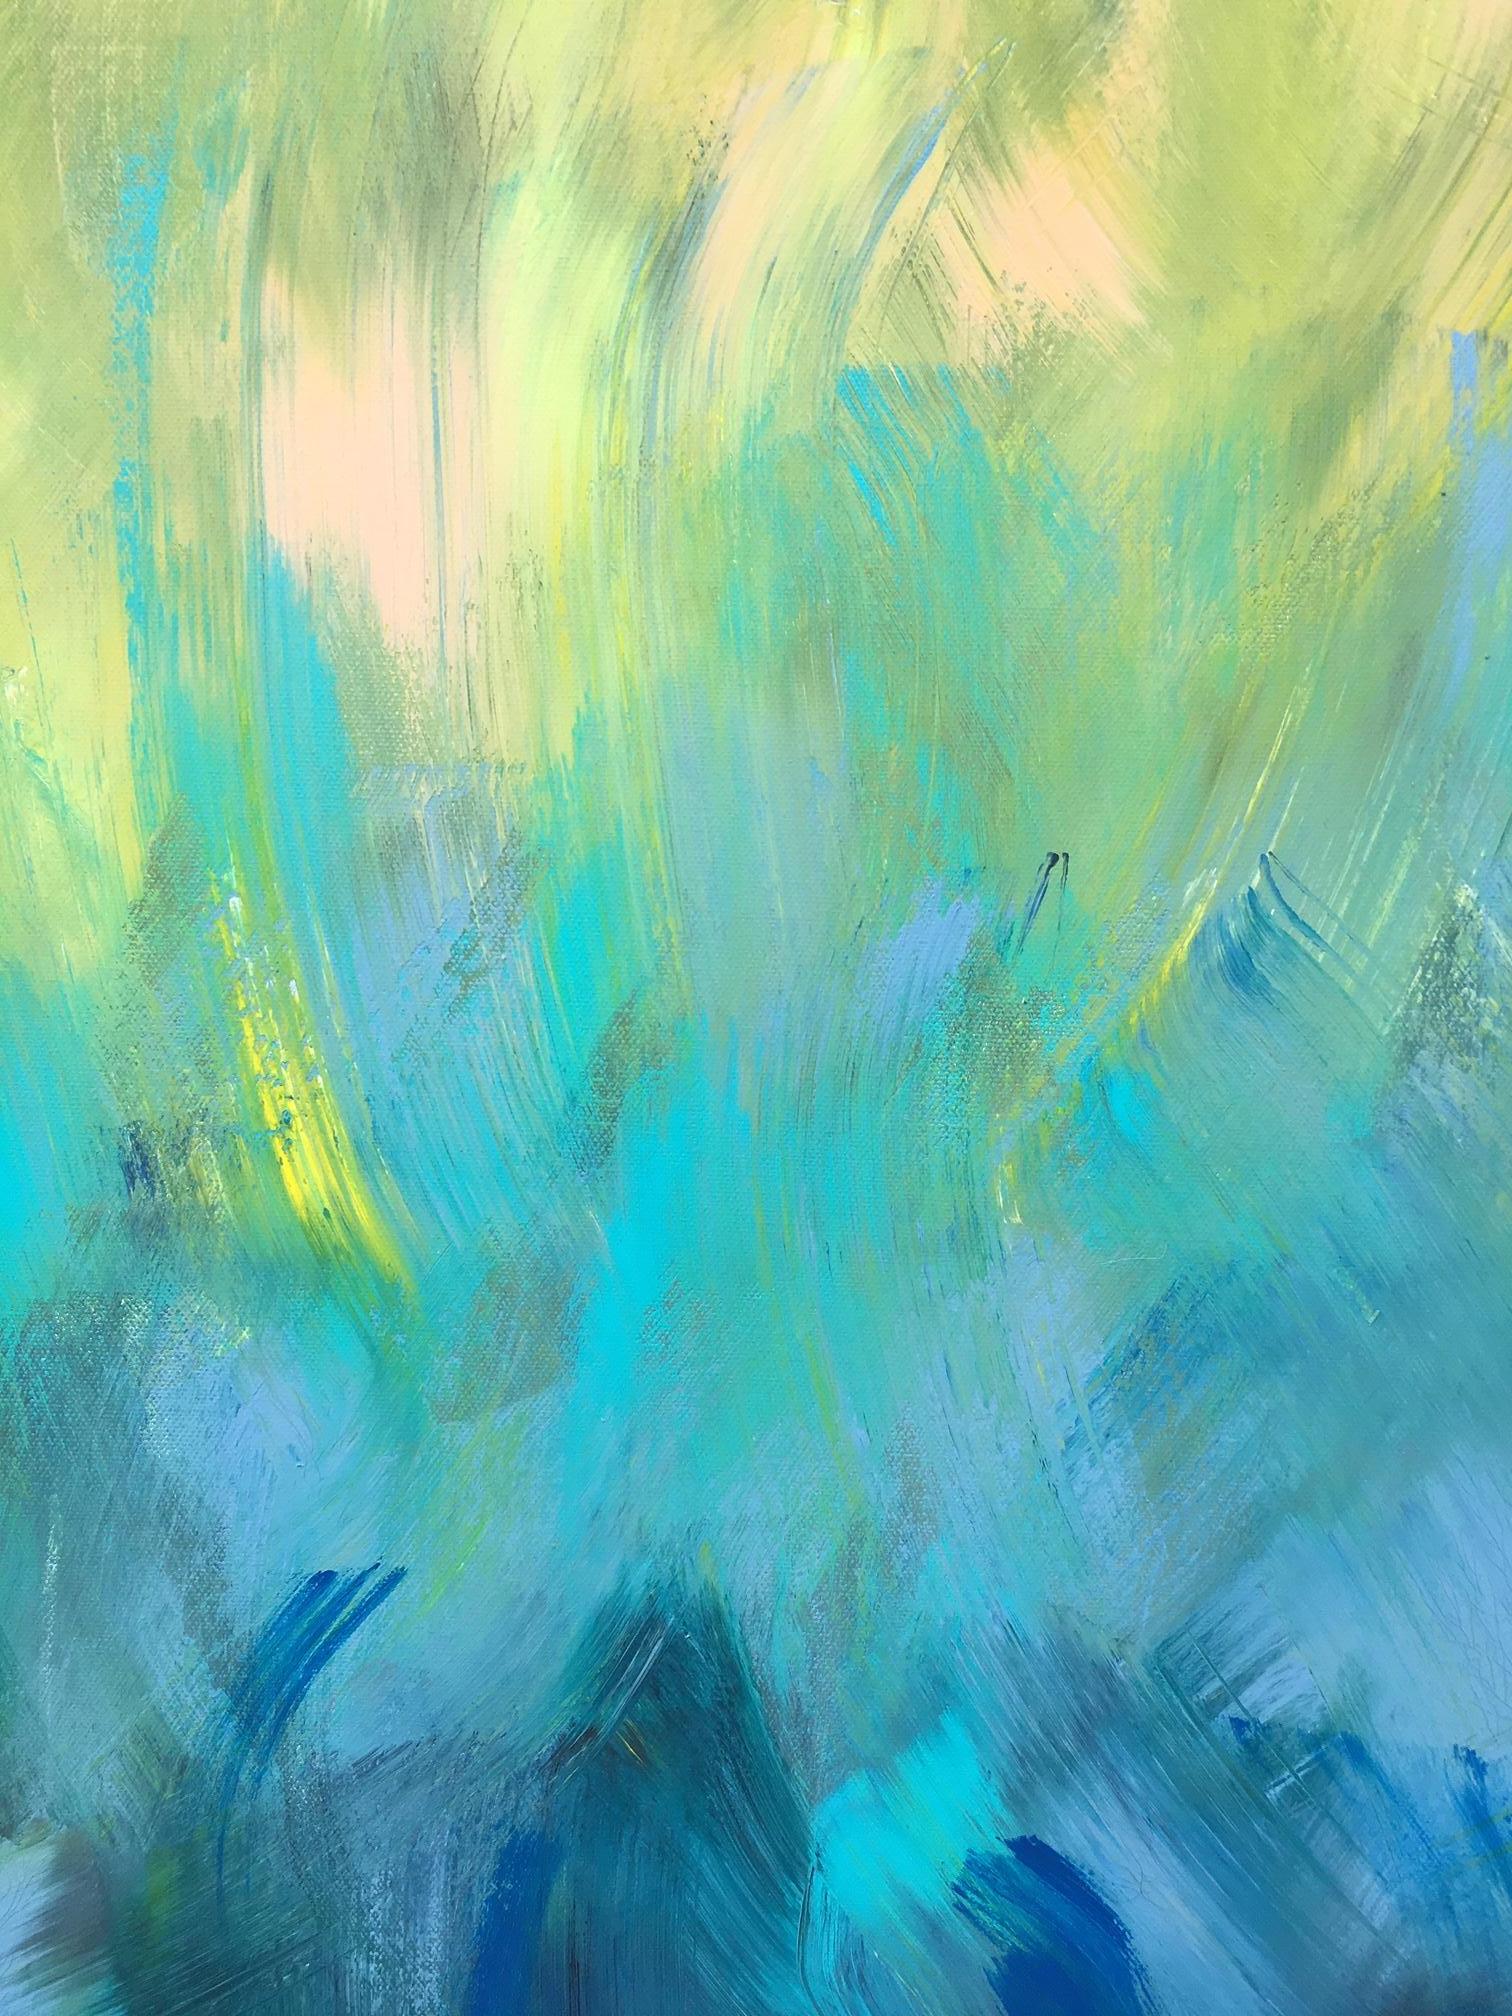 Summer Romance by Katharina Husslein, Gold, Blue Contemporary Stripes Abstract 3